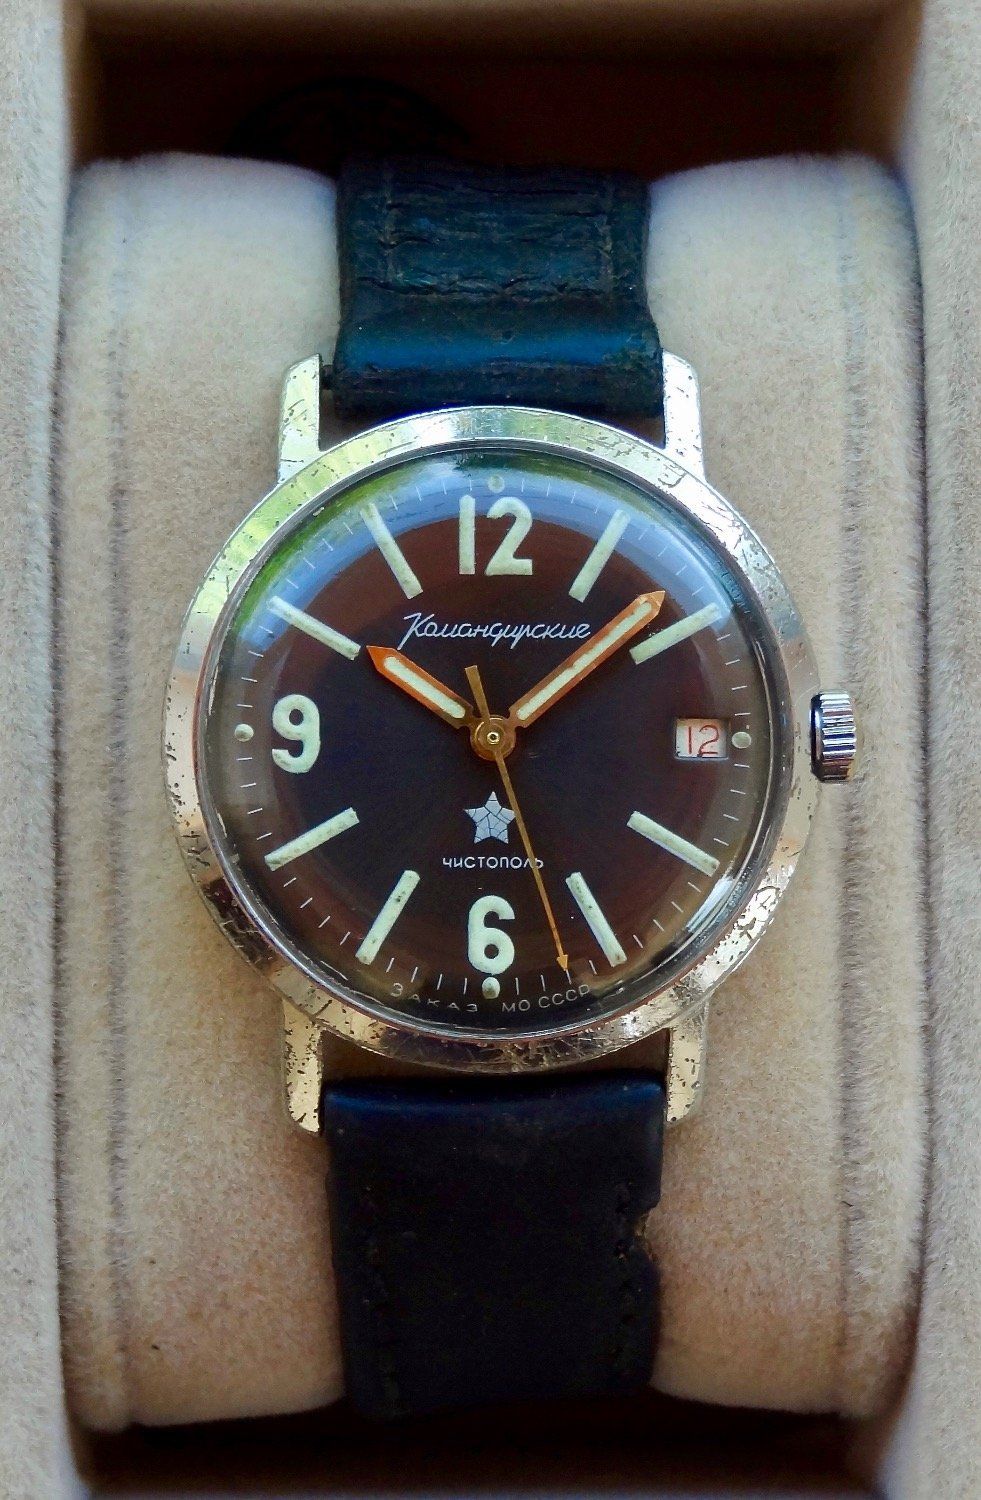 A Komandirskie issued to MOD,USSR marked "ЗАКАЗ МО СССР" at 6'o Clock (Courtesy: Dashiell Stanford; https://mroatman.wixsite.com/watches-of-the-ussr)